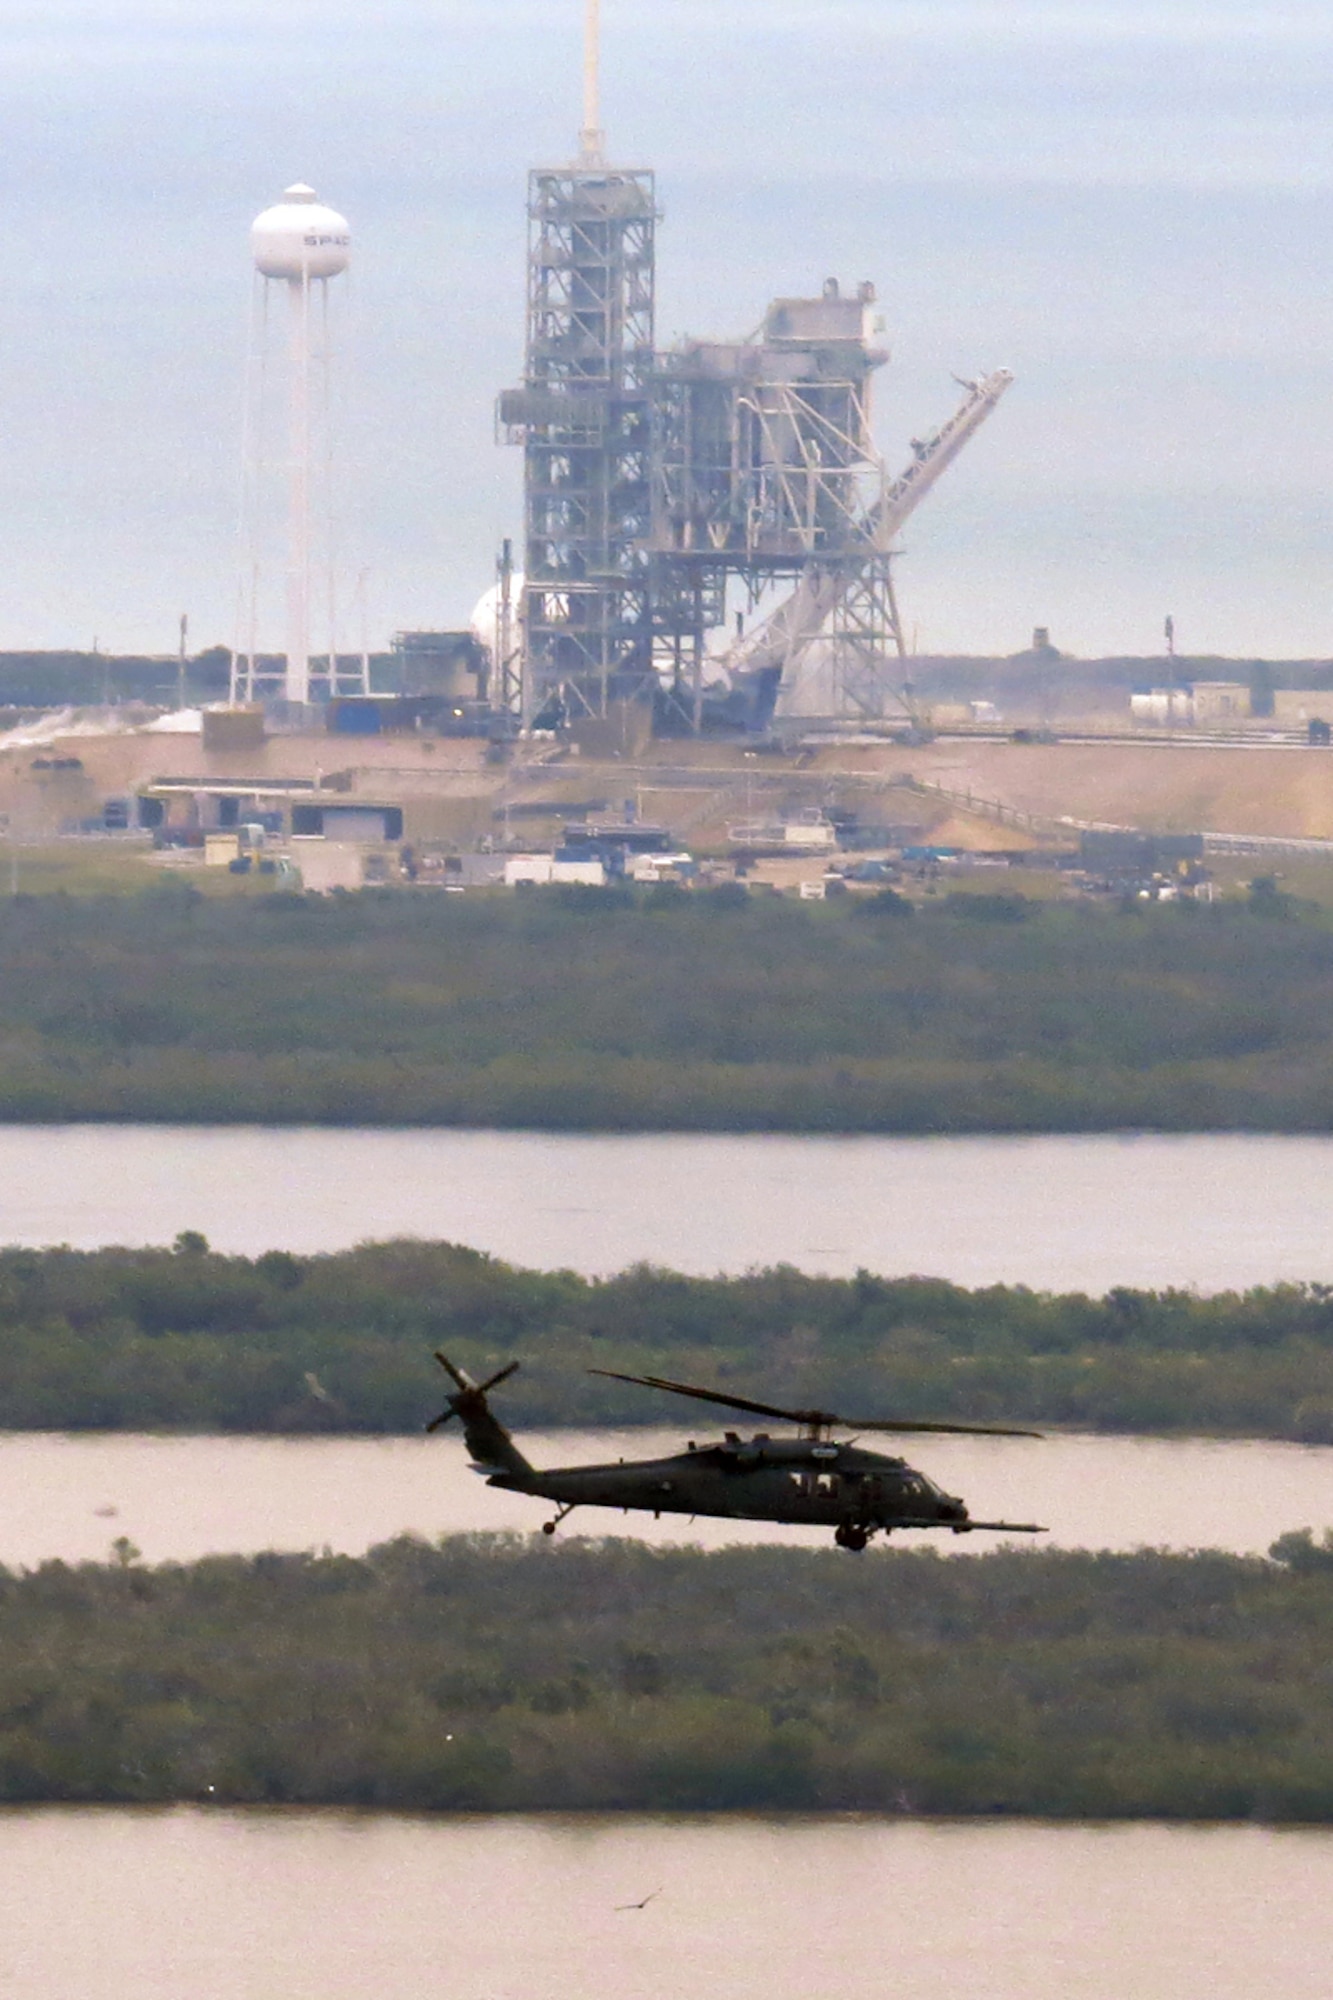 Lt. Cols. Michael Stucker and Gordon Schmidt, HH-60G Pave Hawk helicopter pilots with the 301st Rescue Squadron, clear the Eastern Range of boat traffic prior to the successful launch of the SpaceX Dragon spacecraft Feb. 19 at Cape Canaveral Air Force Station, Florida. (Photo by Carleton Bailie)